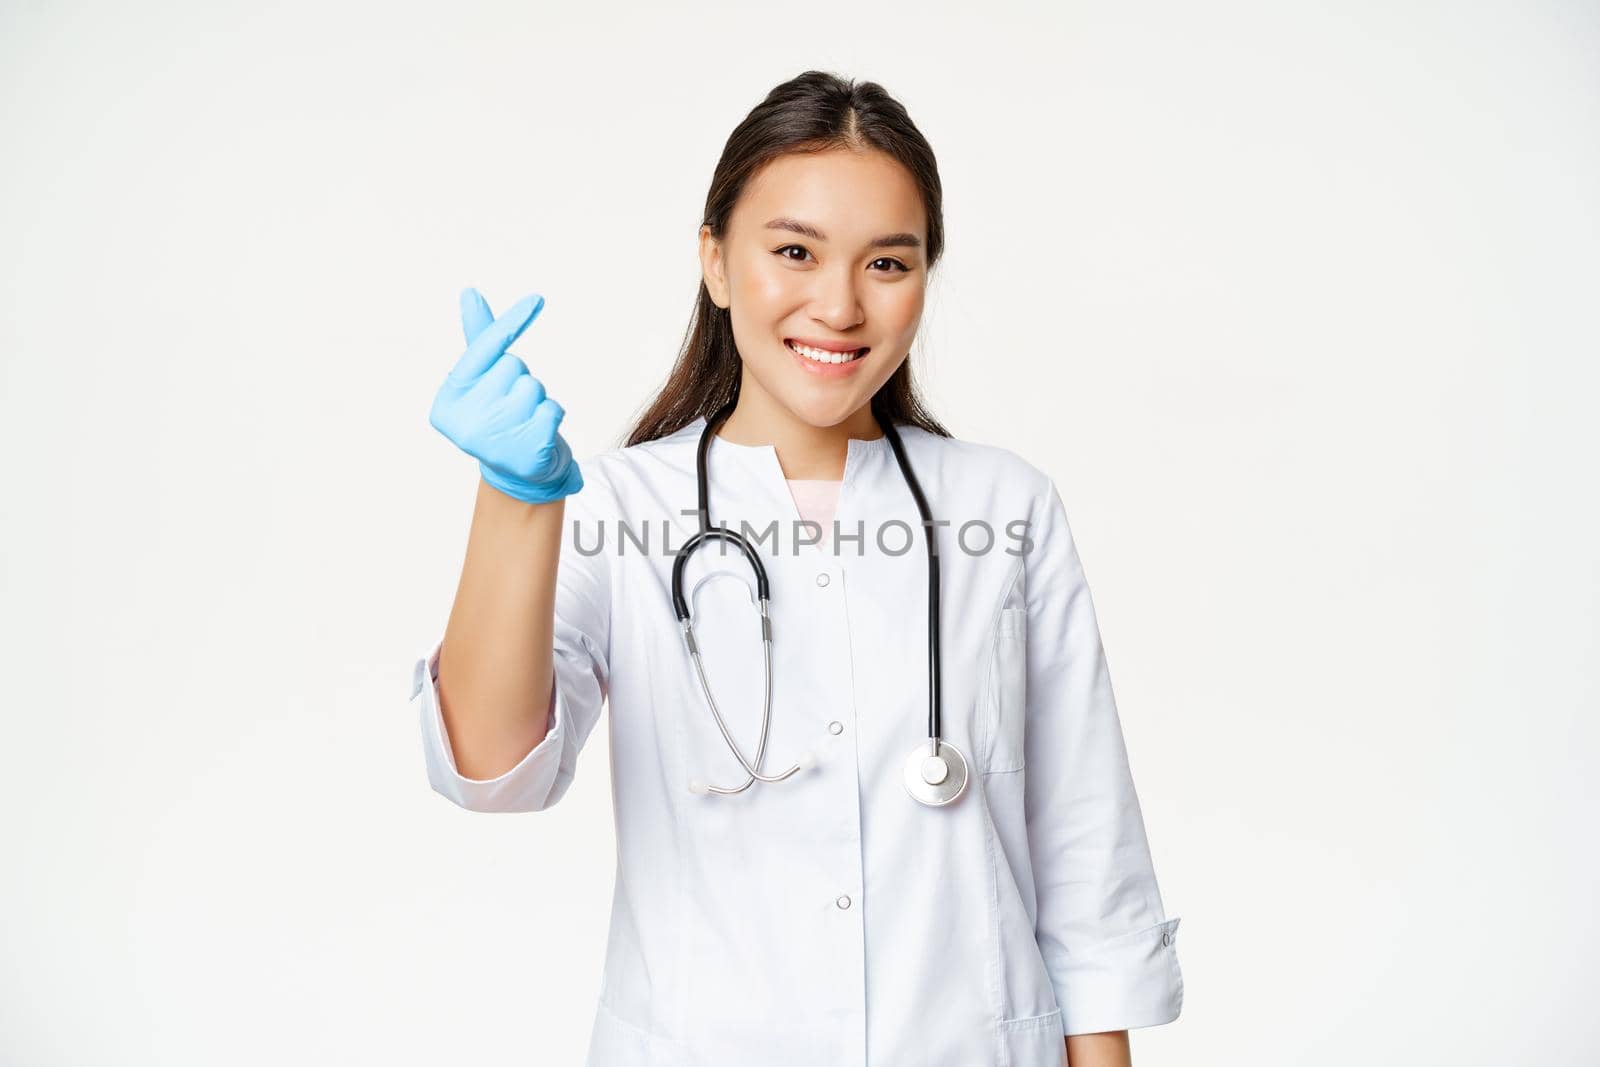 Smiling korean female doctor shows finger heart gesture in rubber gloves, wearing medical uniform, looking happy at camera, white background.